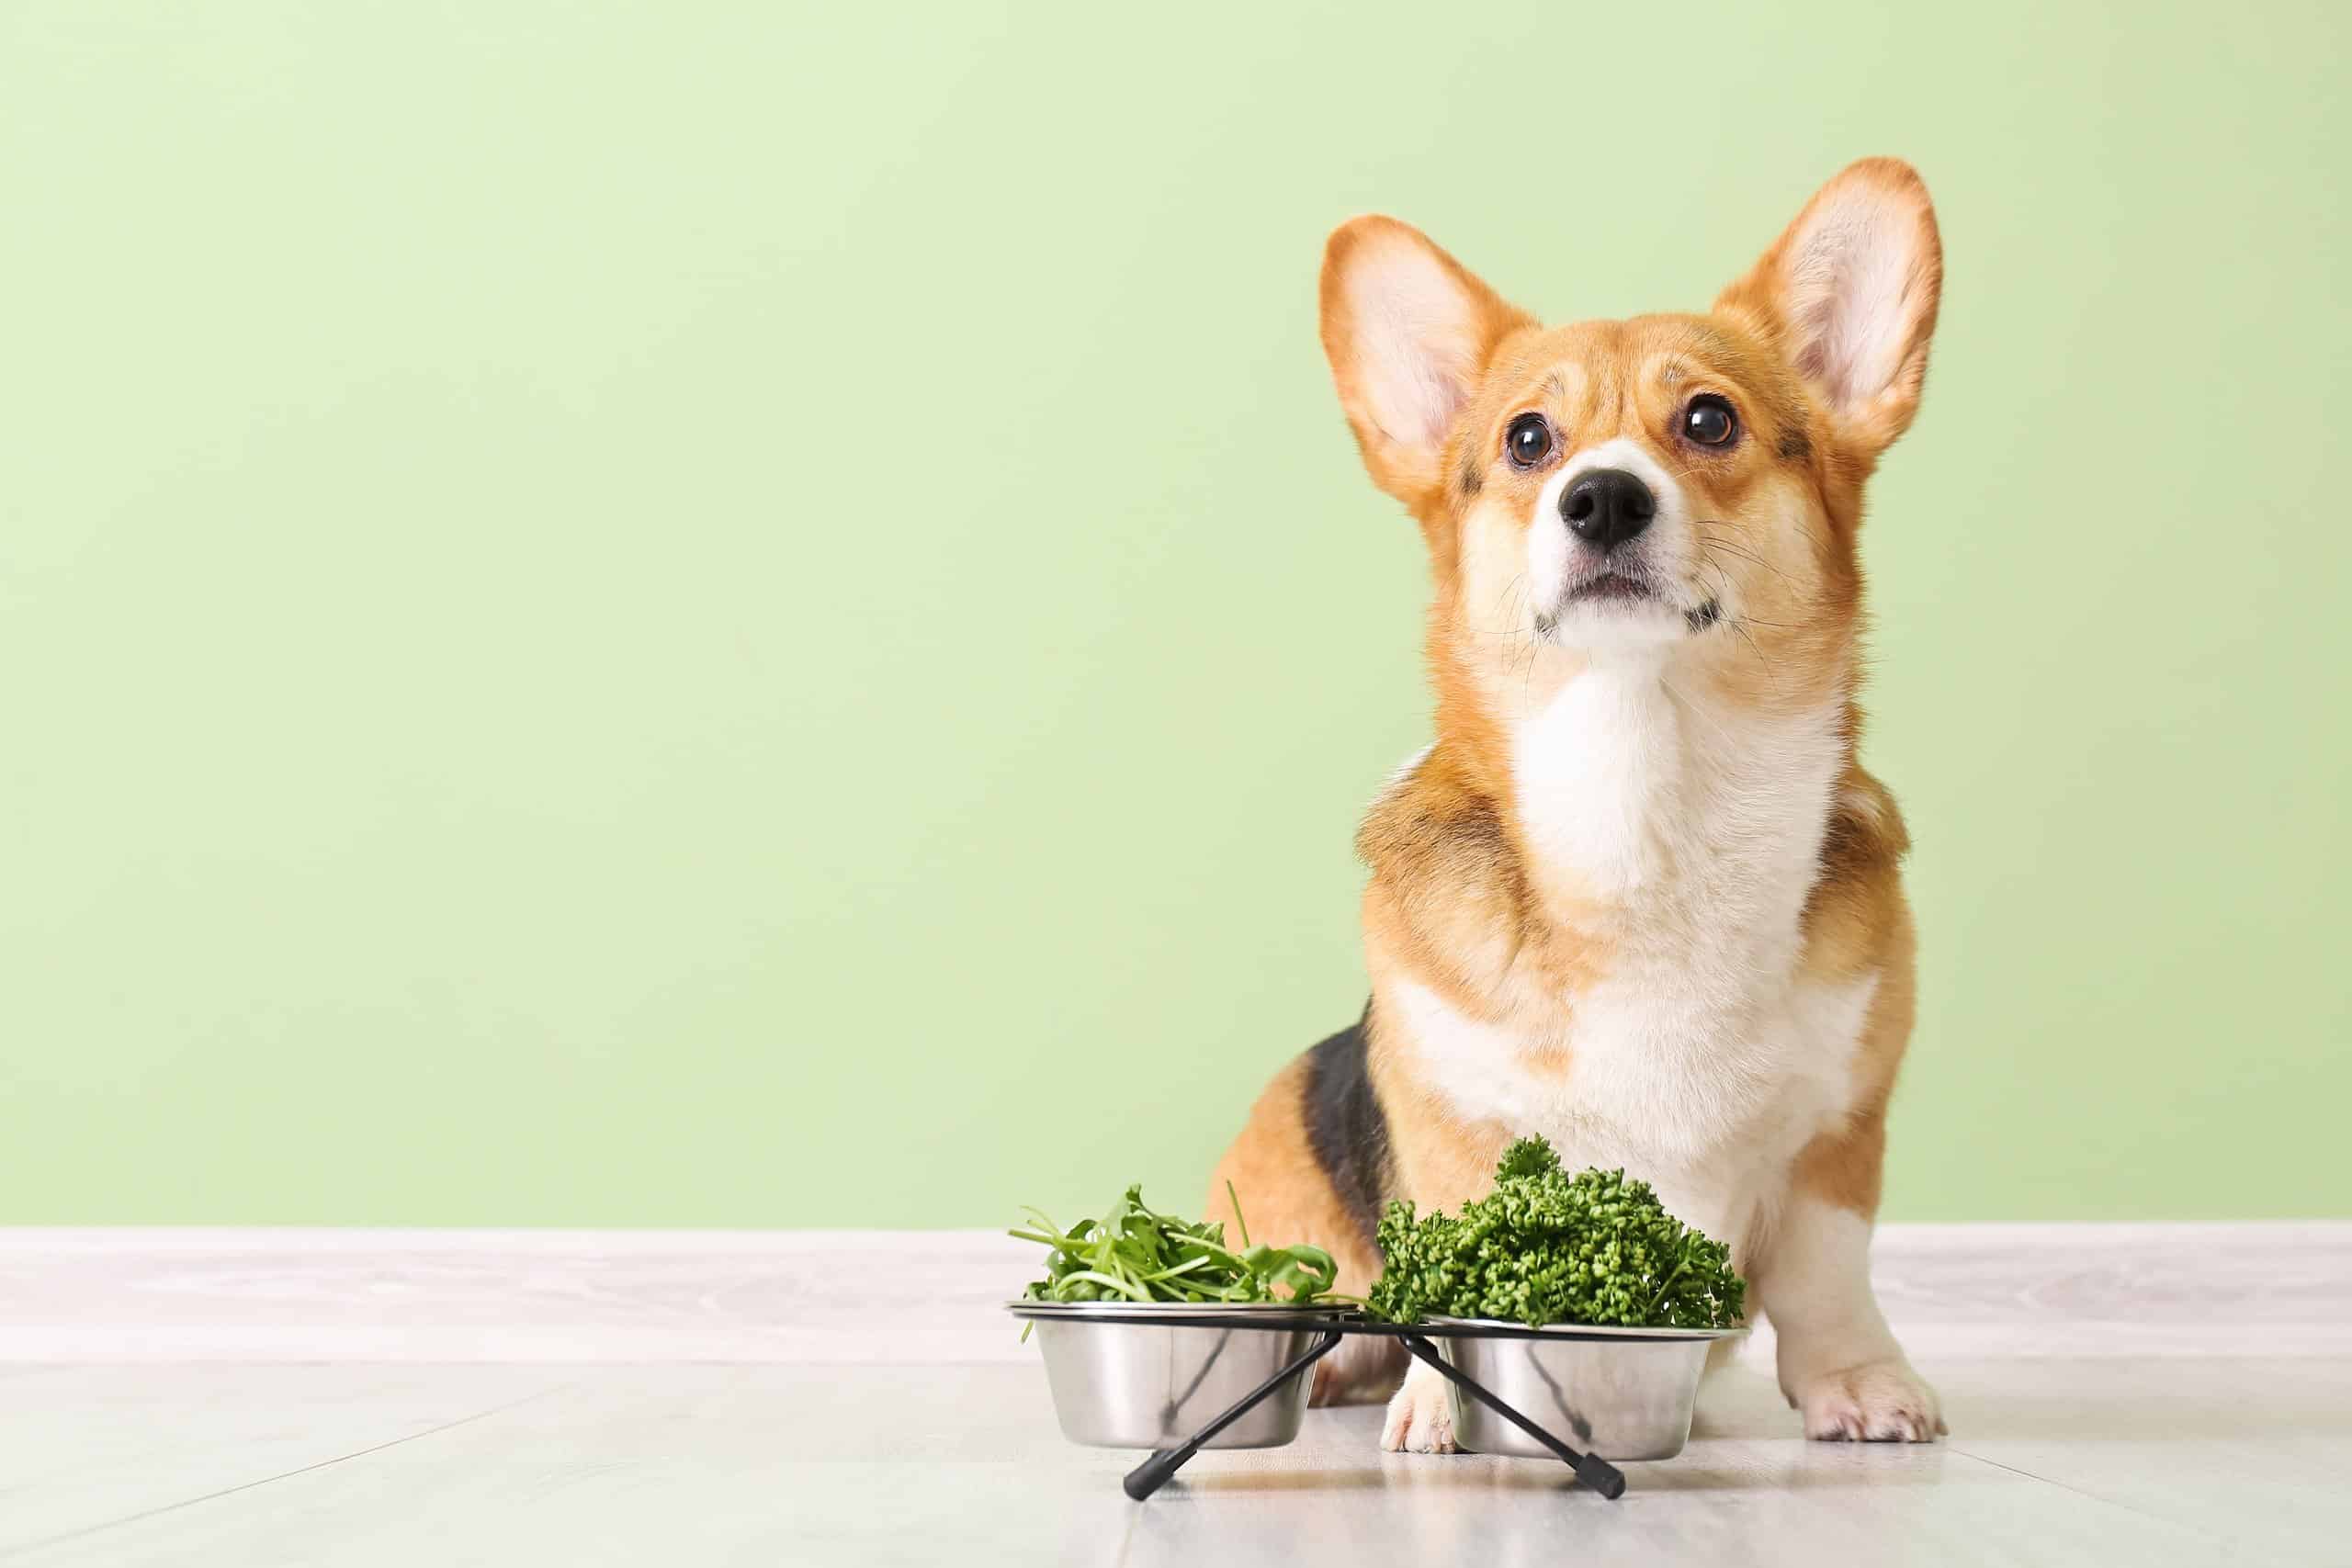 A dog sitting next to a bowl of greens